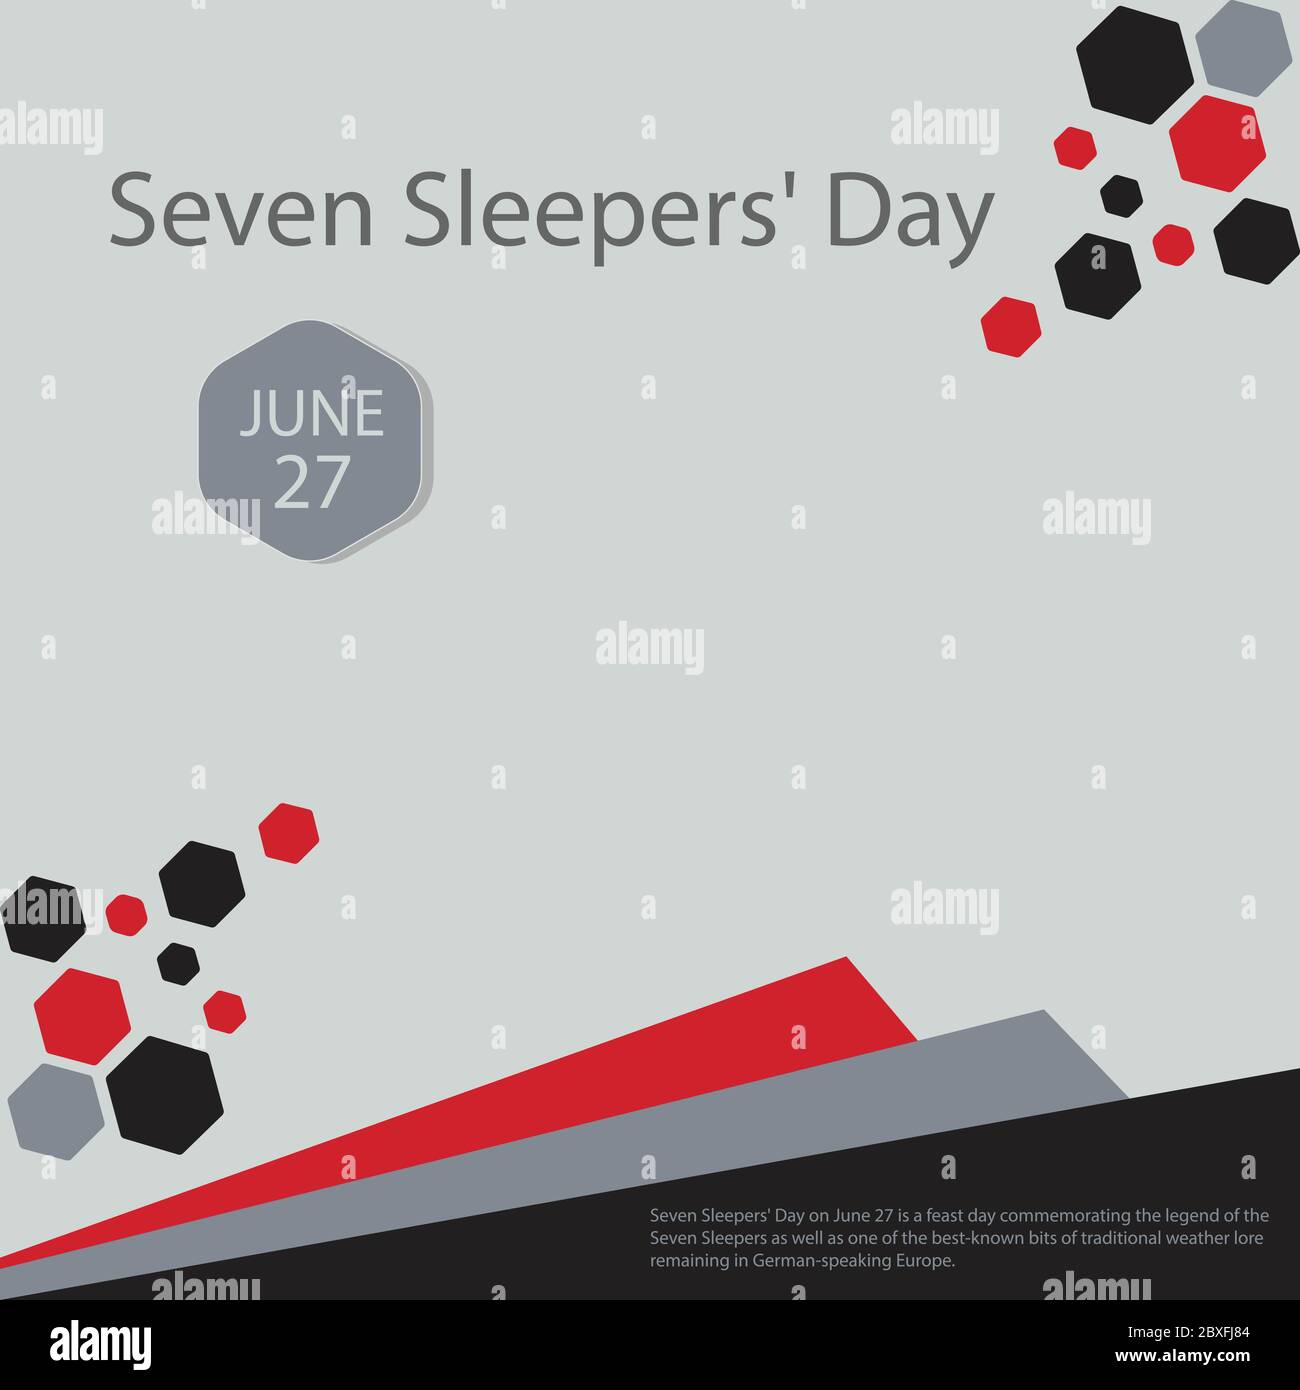 Seven Sleepers' Day on June 27 is a feast day commemorating the legend of the Seven Sleepers as well as one of the best-known bits of traditional weat Stock Vector